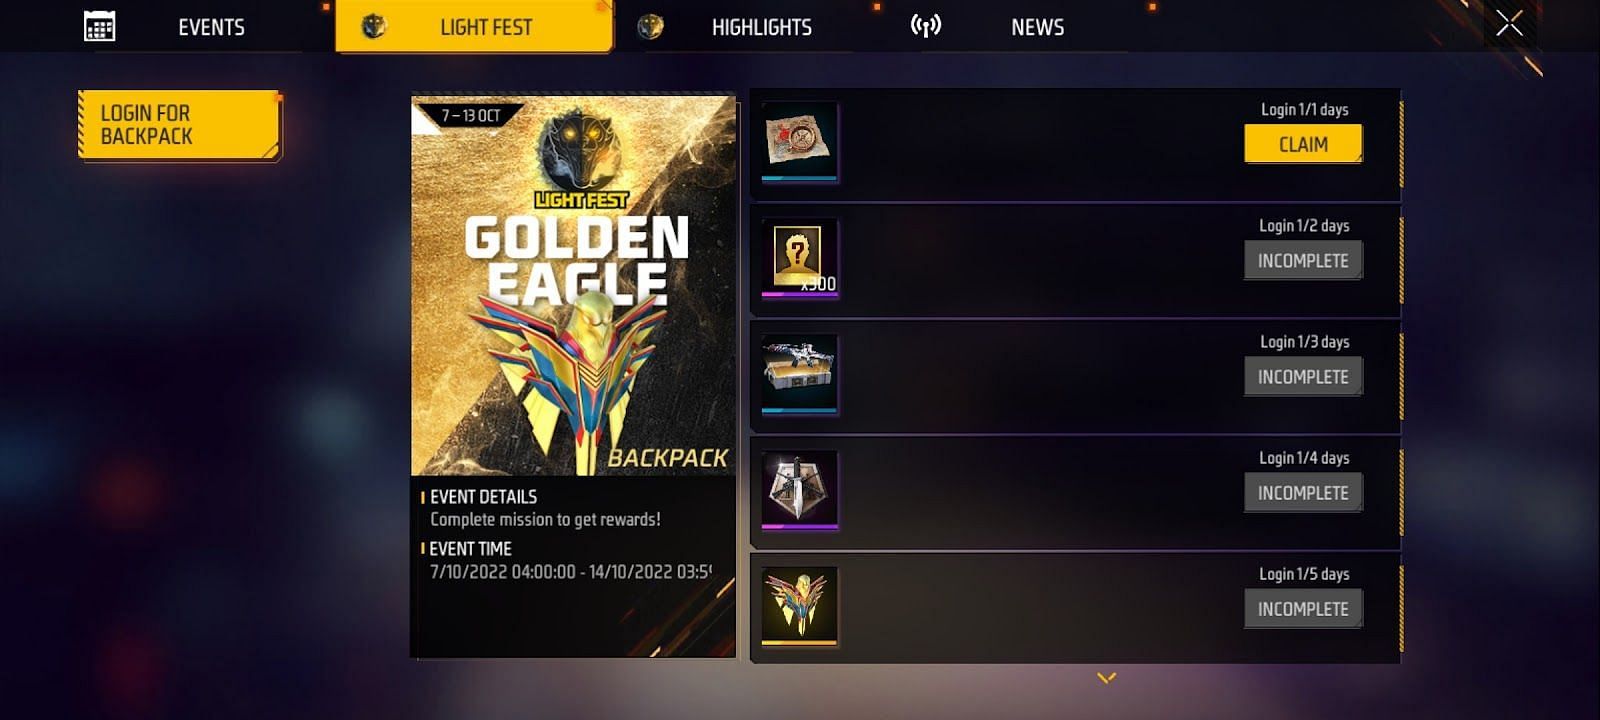 Golden Eagle Backpack is available as a login reward in Free Fire MAX (Image via Garena)